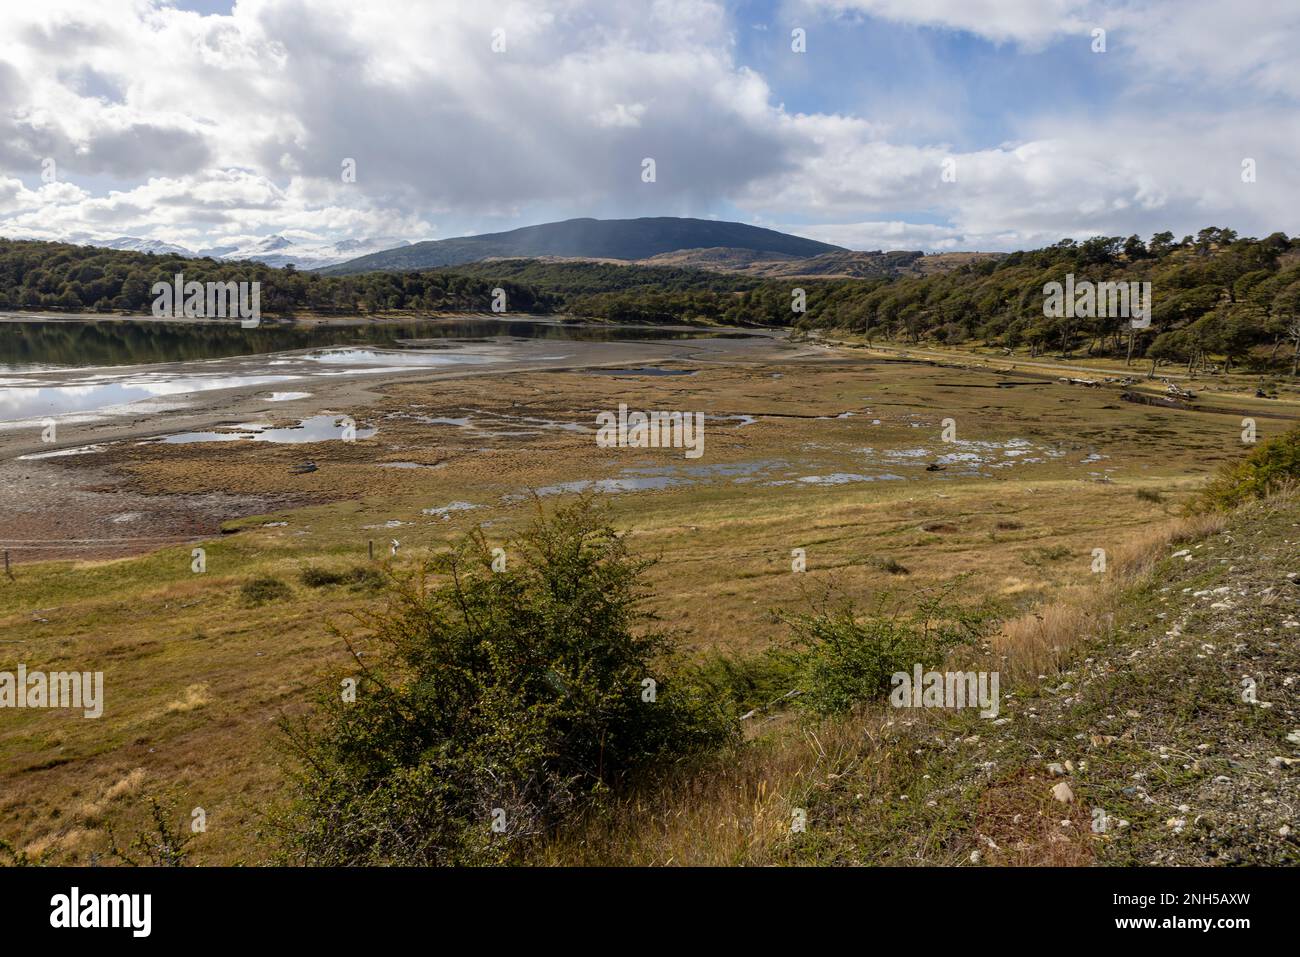 Landscape at the beautiful end of the world - Ushuaia, Tierra del Fuego, South America Stock Photo